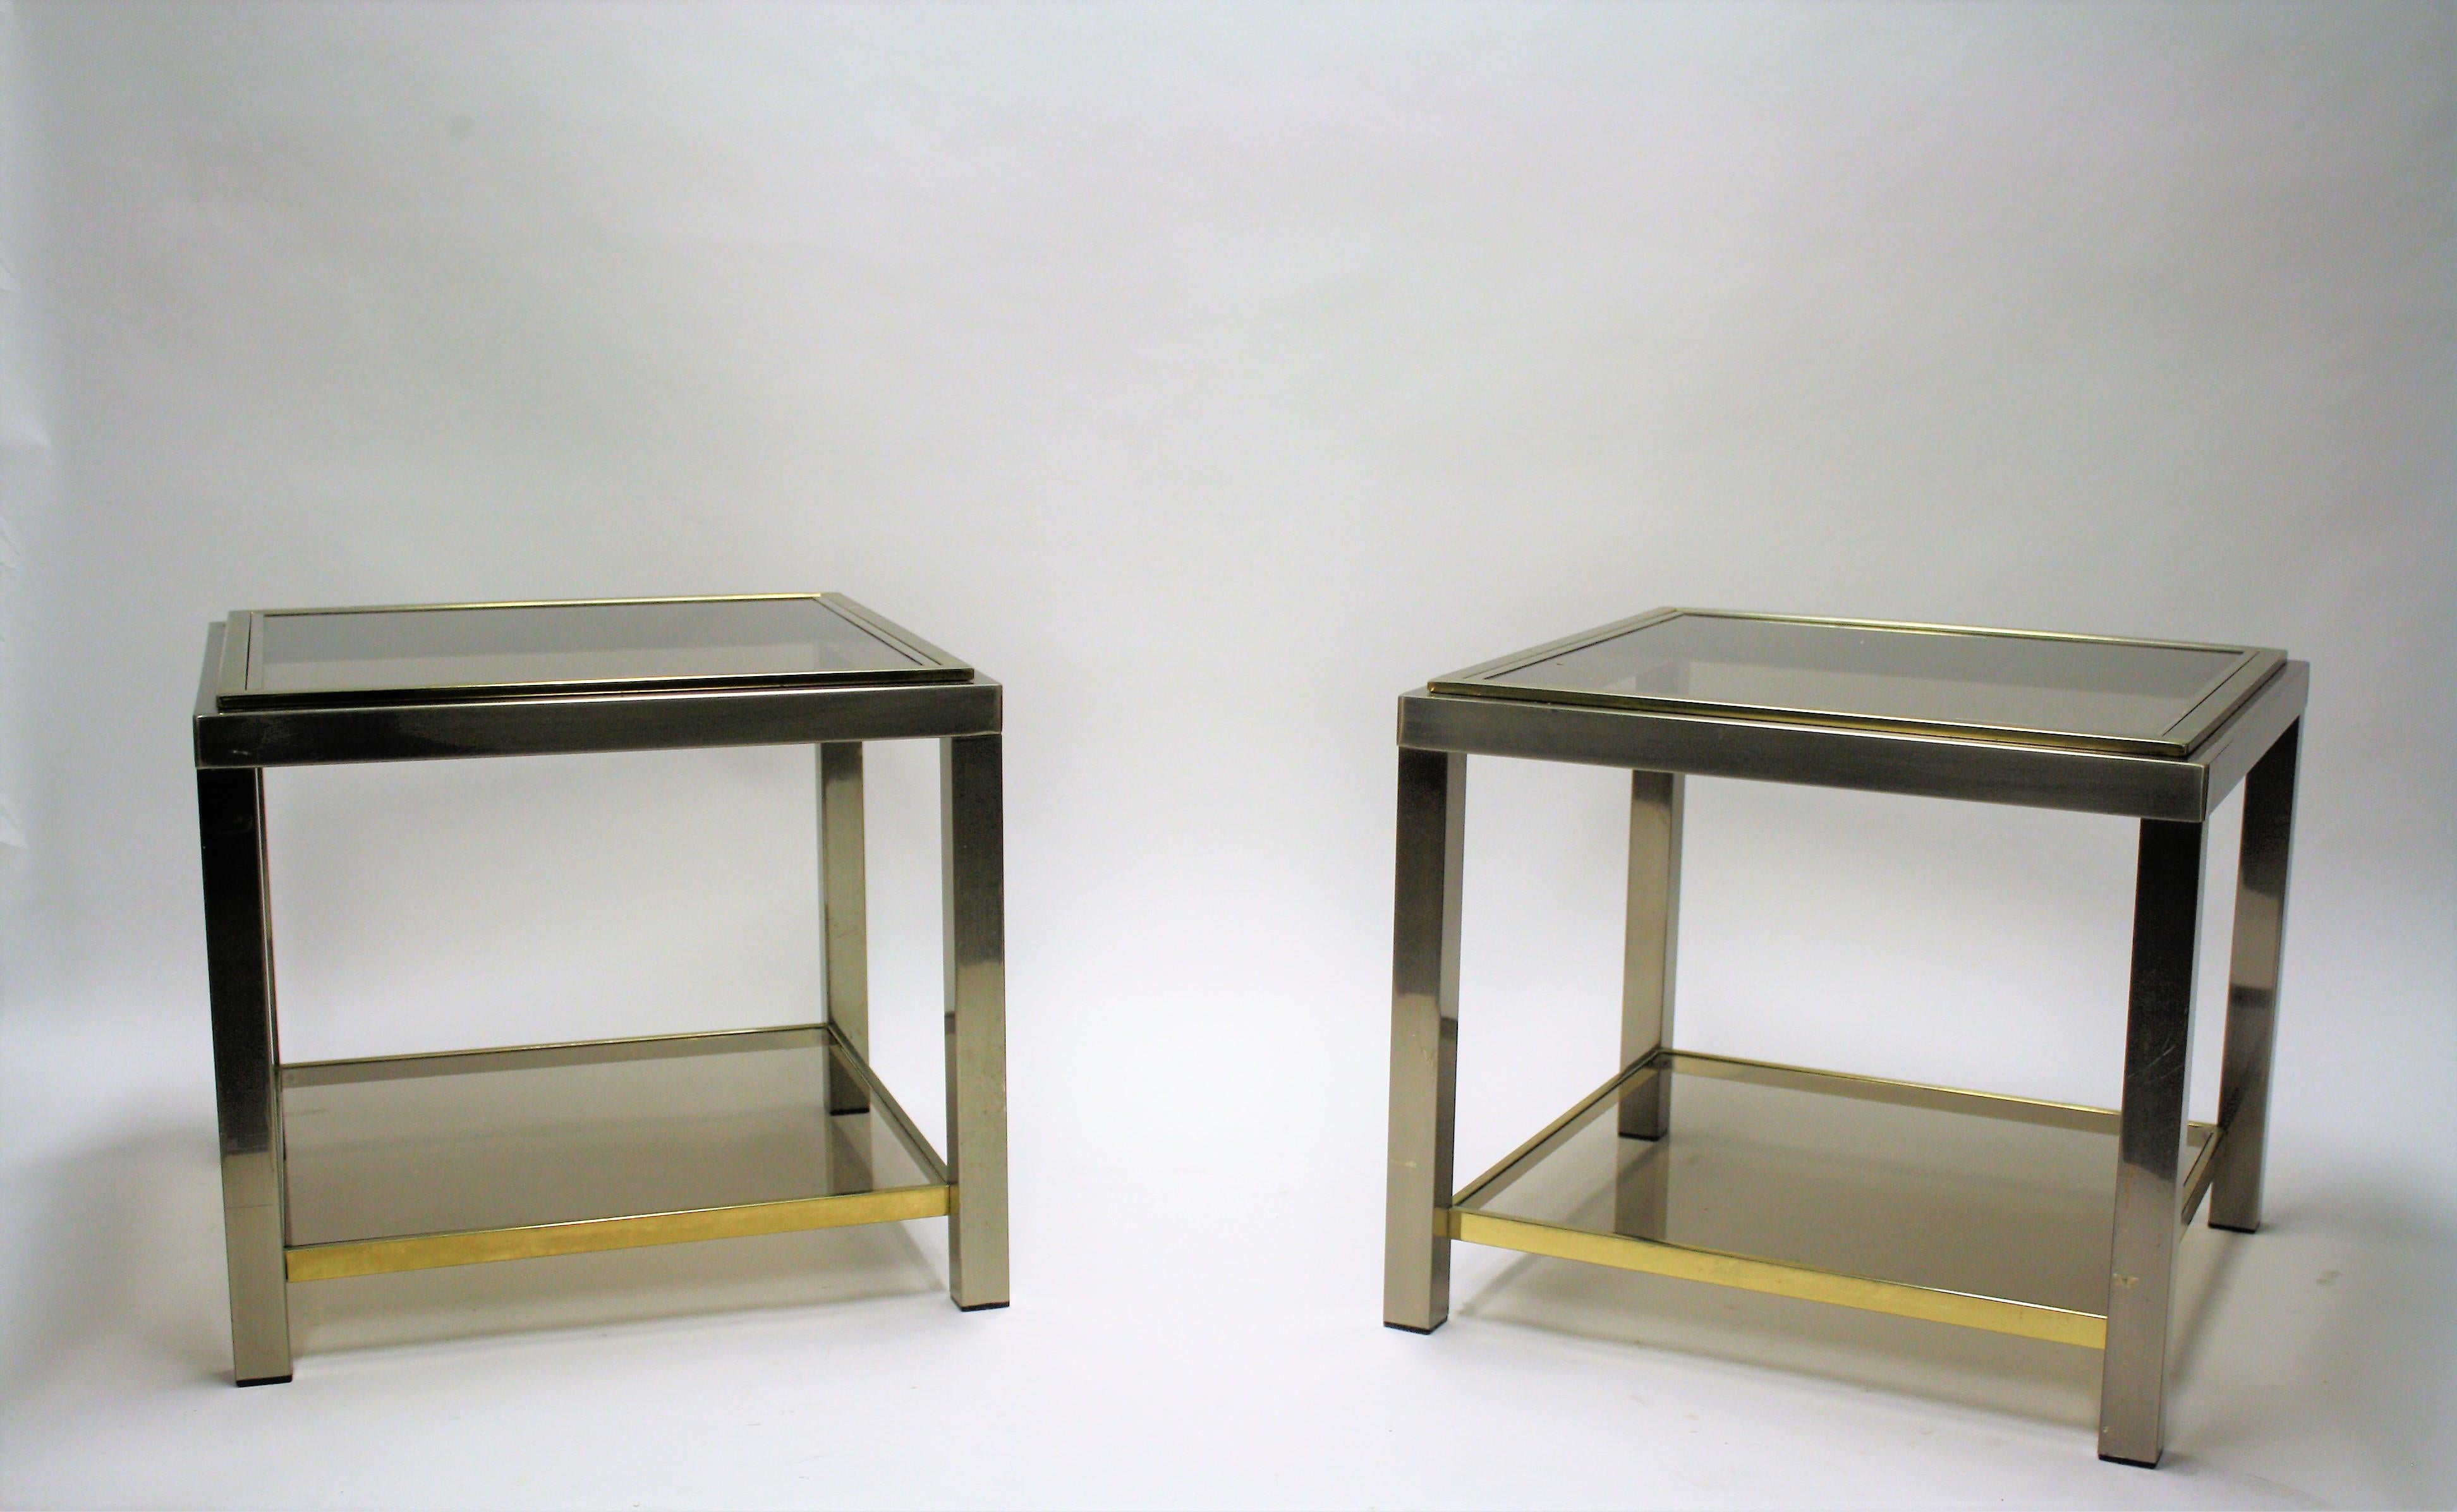 Pair of two tiered brass and chrome side tables by Jean Charles.

Light wear on the brass, light scratches on the glass.

Measures: Height 51cm/20.07